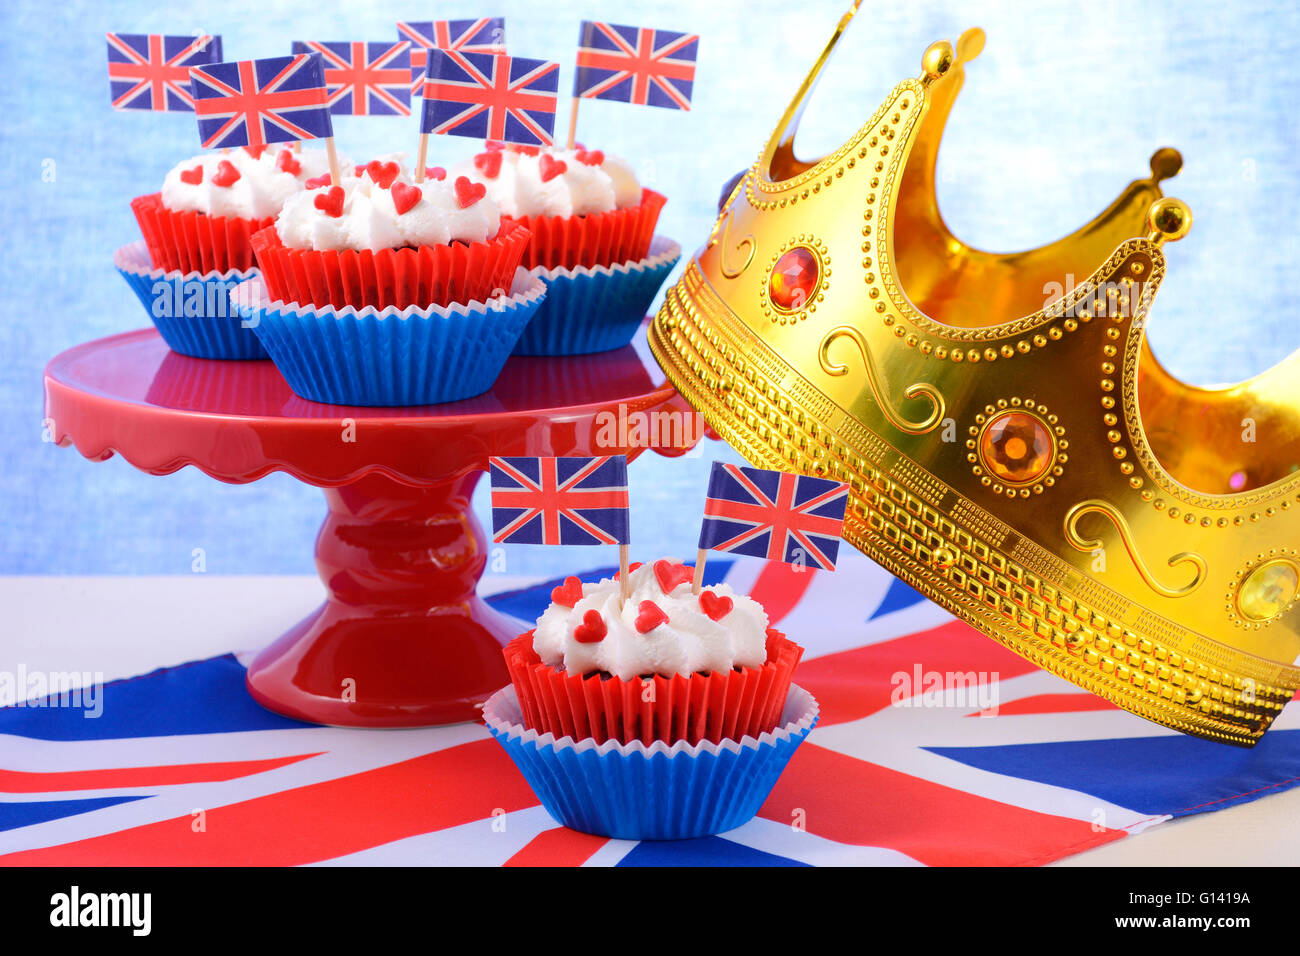 Holiday party cupcakes with UK flags on red cake stand with Union Jack flag. Stock Photo